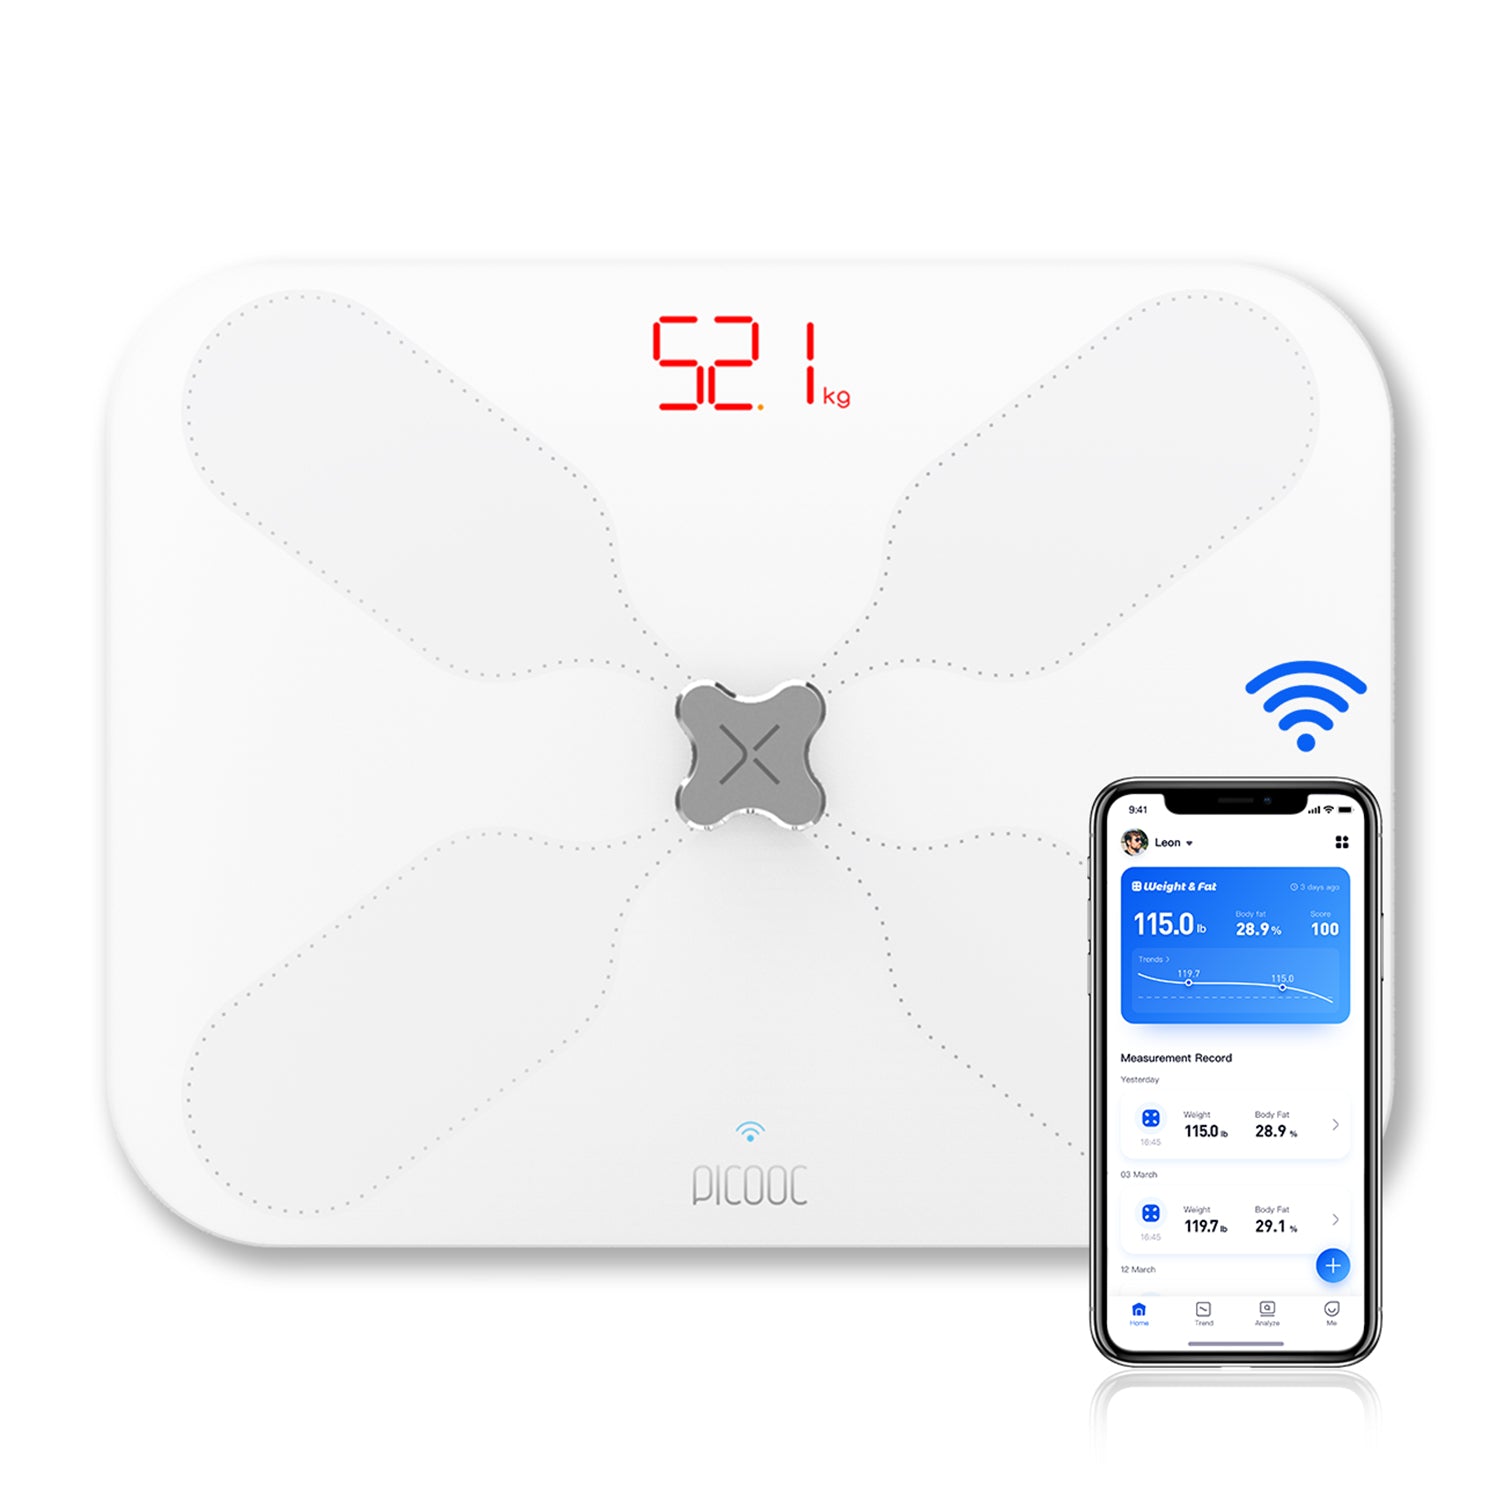 Connect your apps to PICOOC smart scale 